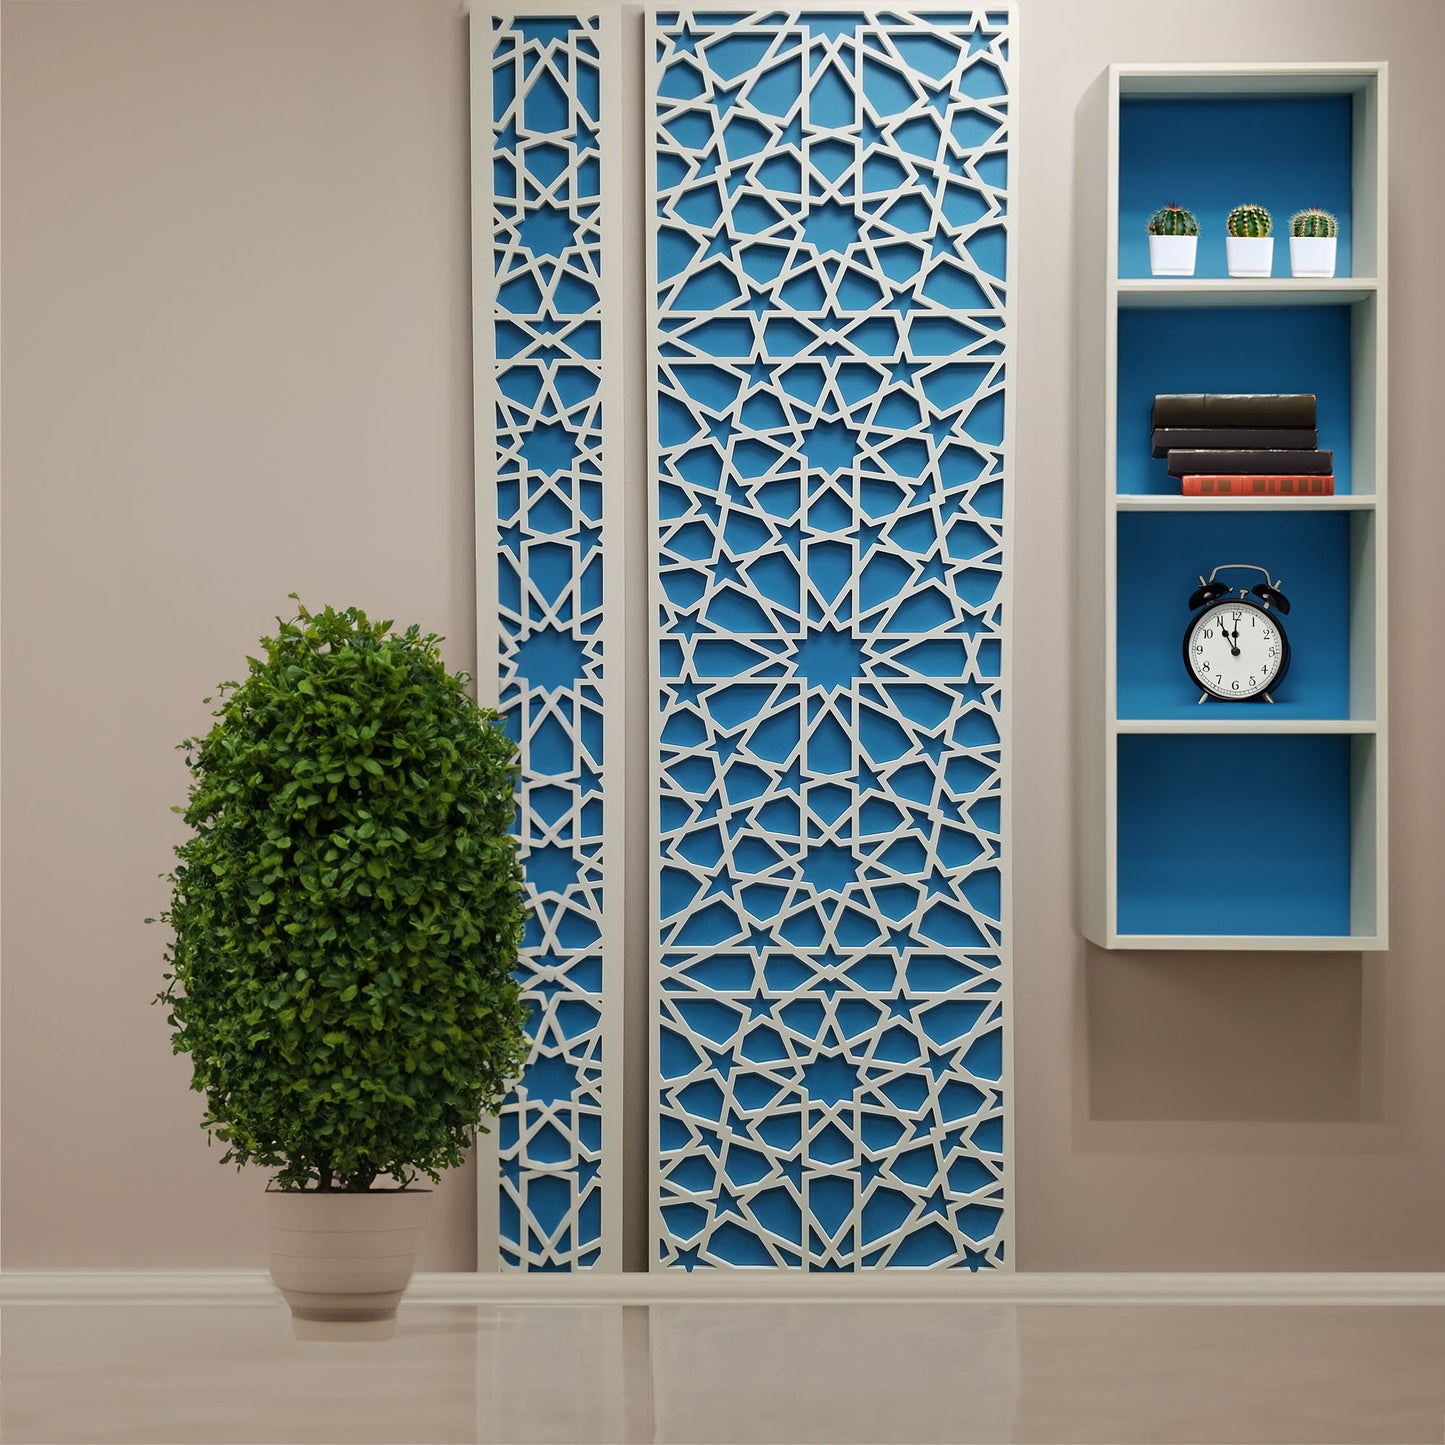 room divider, room divider, wall divider,divider wall, room divider, Craftivaart room dividers, Craftivaart Panels, Craftivaart High-quality room dividers,room privacy dividers, Budget-friendly room dividers,